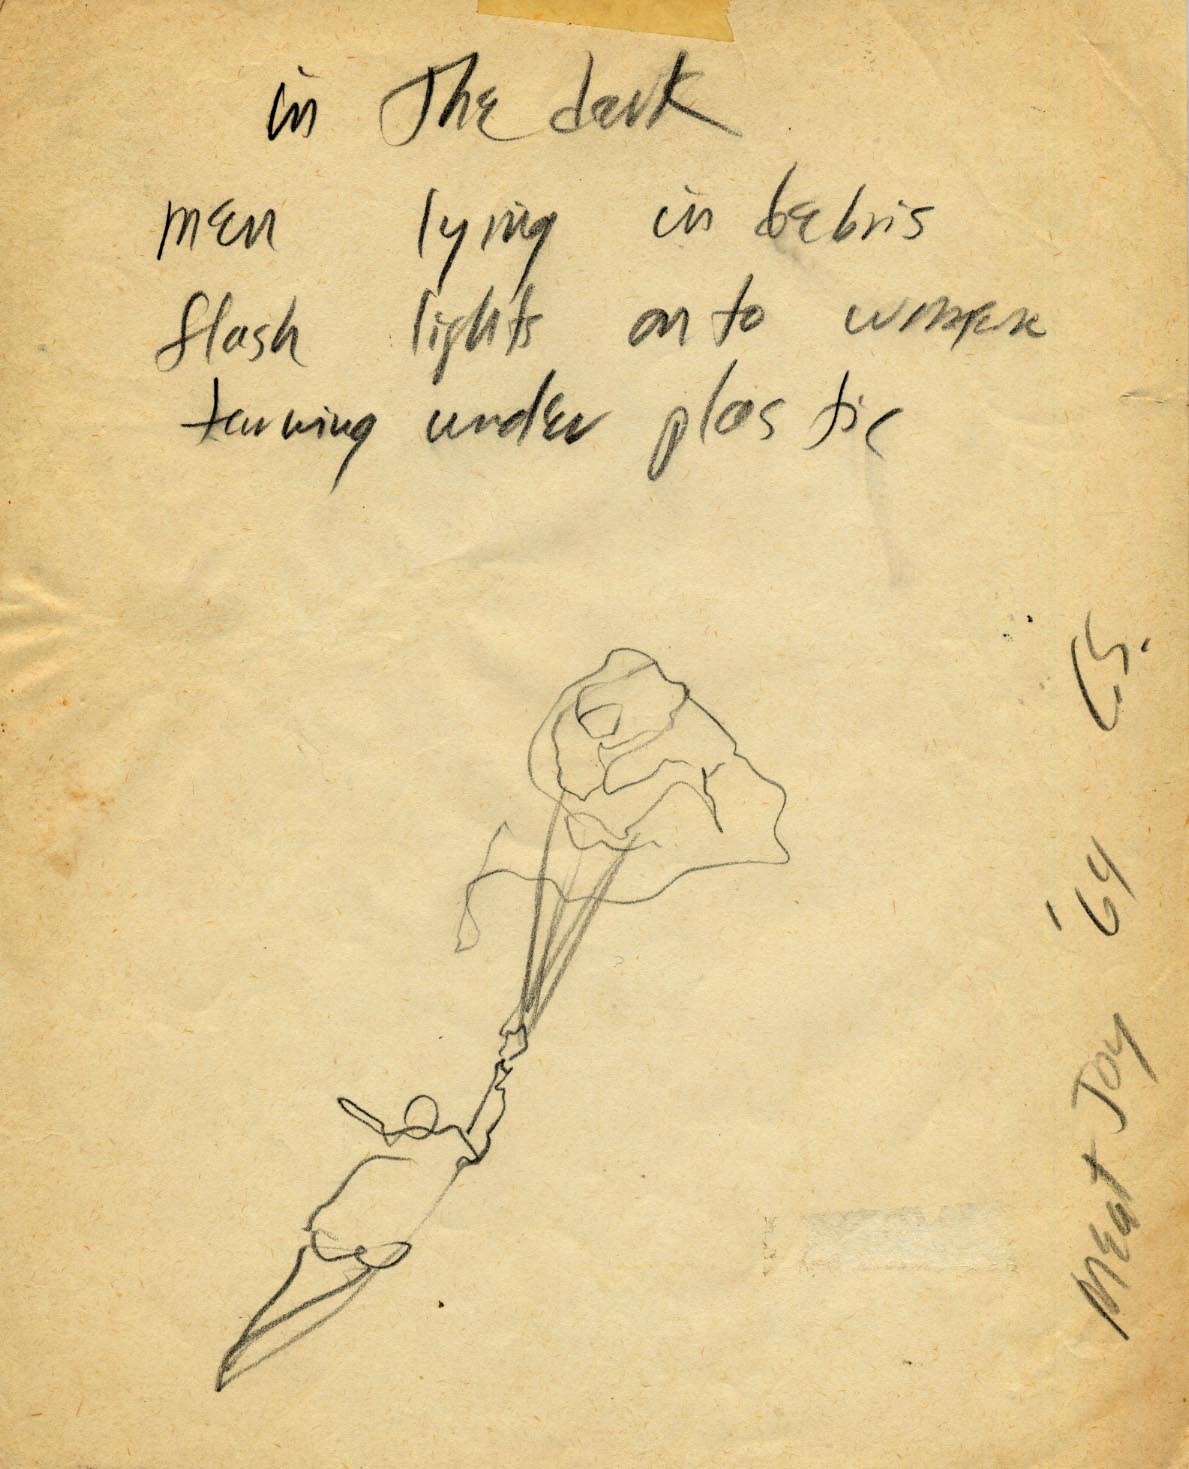 Concept sketch of the performance in charcaol on paper. Written at the top is "in the dark / men lying in debris / flash lights onto women / [illegible] under plastic."